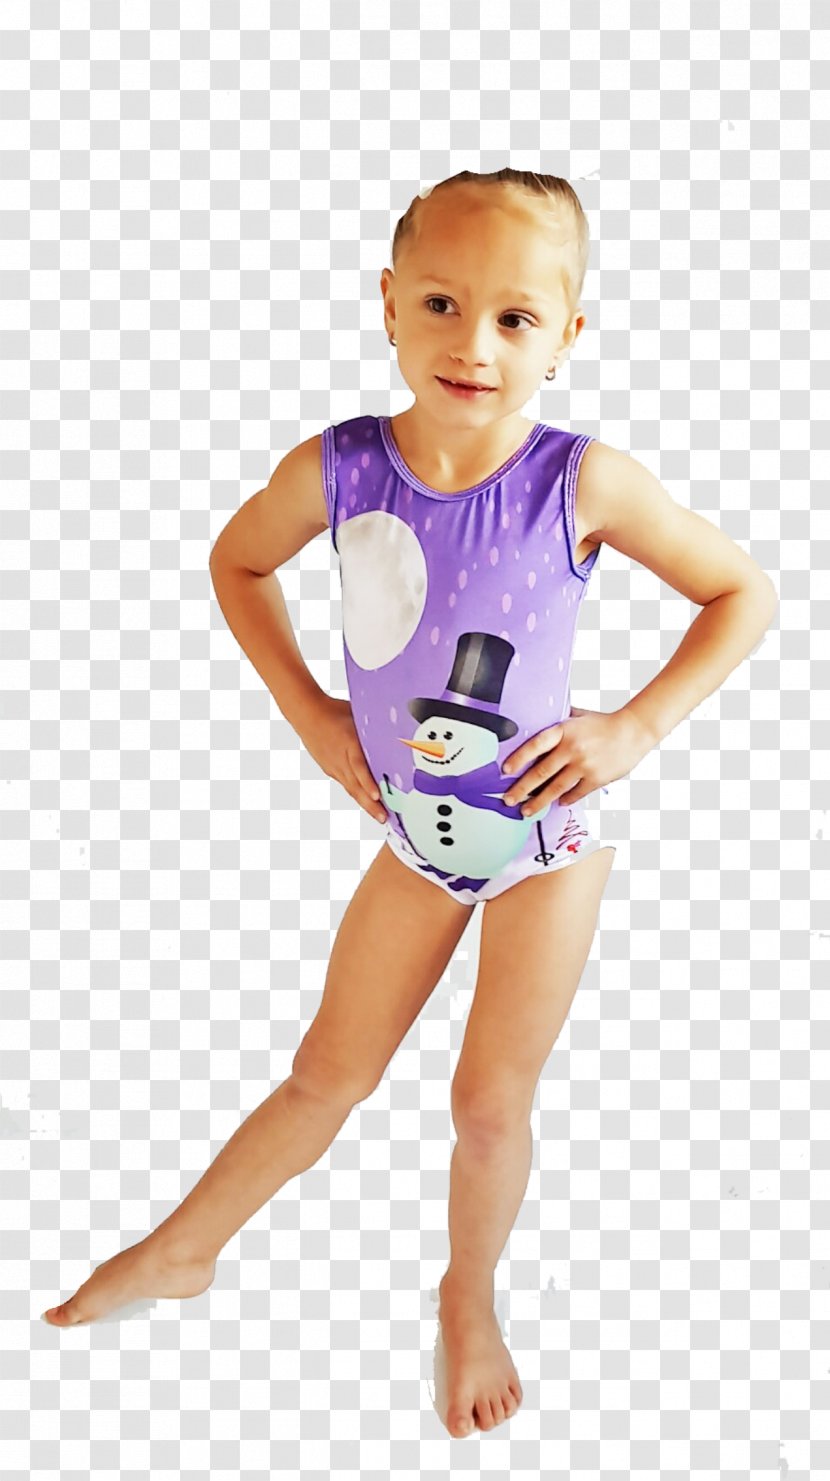 Bodysuits & Unitards Clothing Sportswear Maillot Gymnastics - Silhouette Transparent PNG